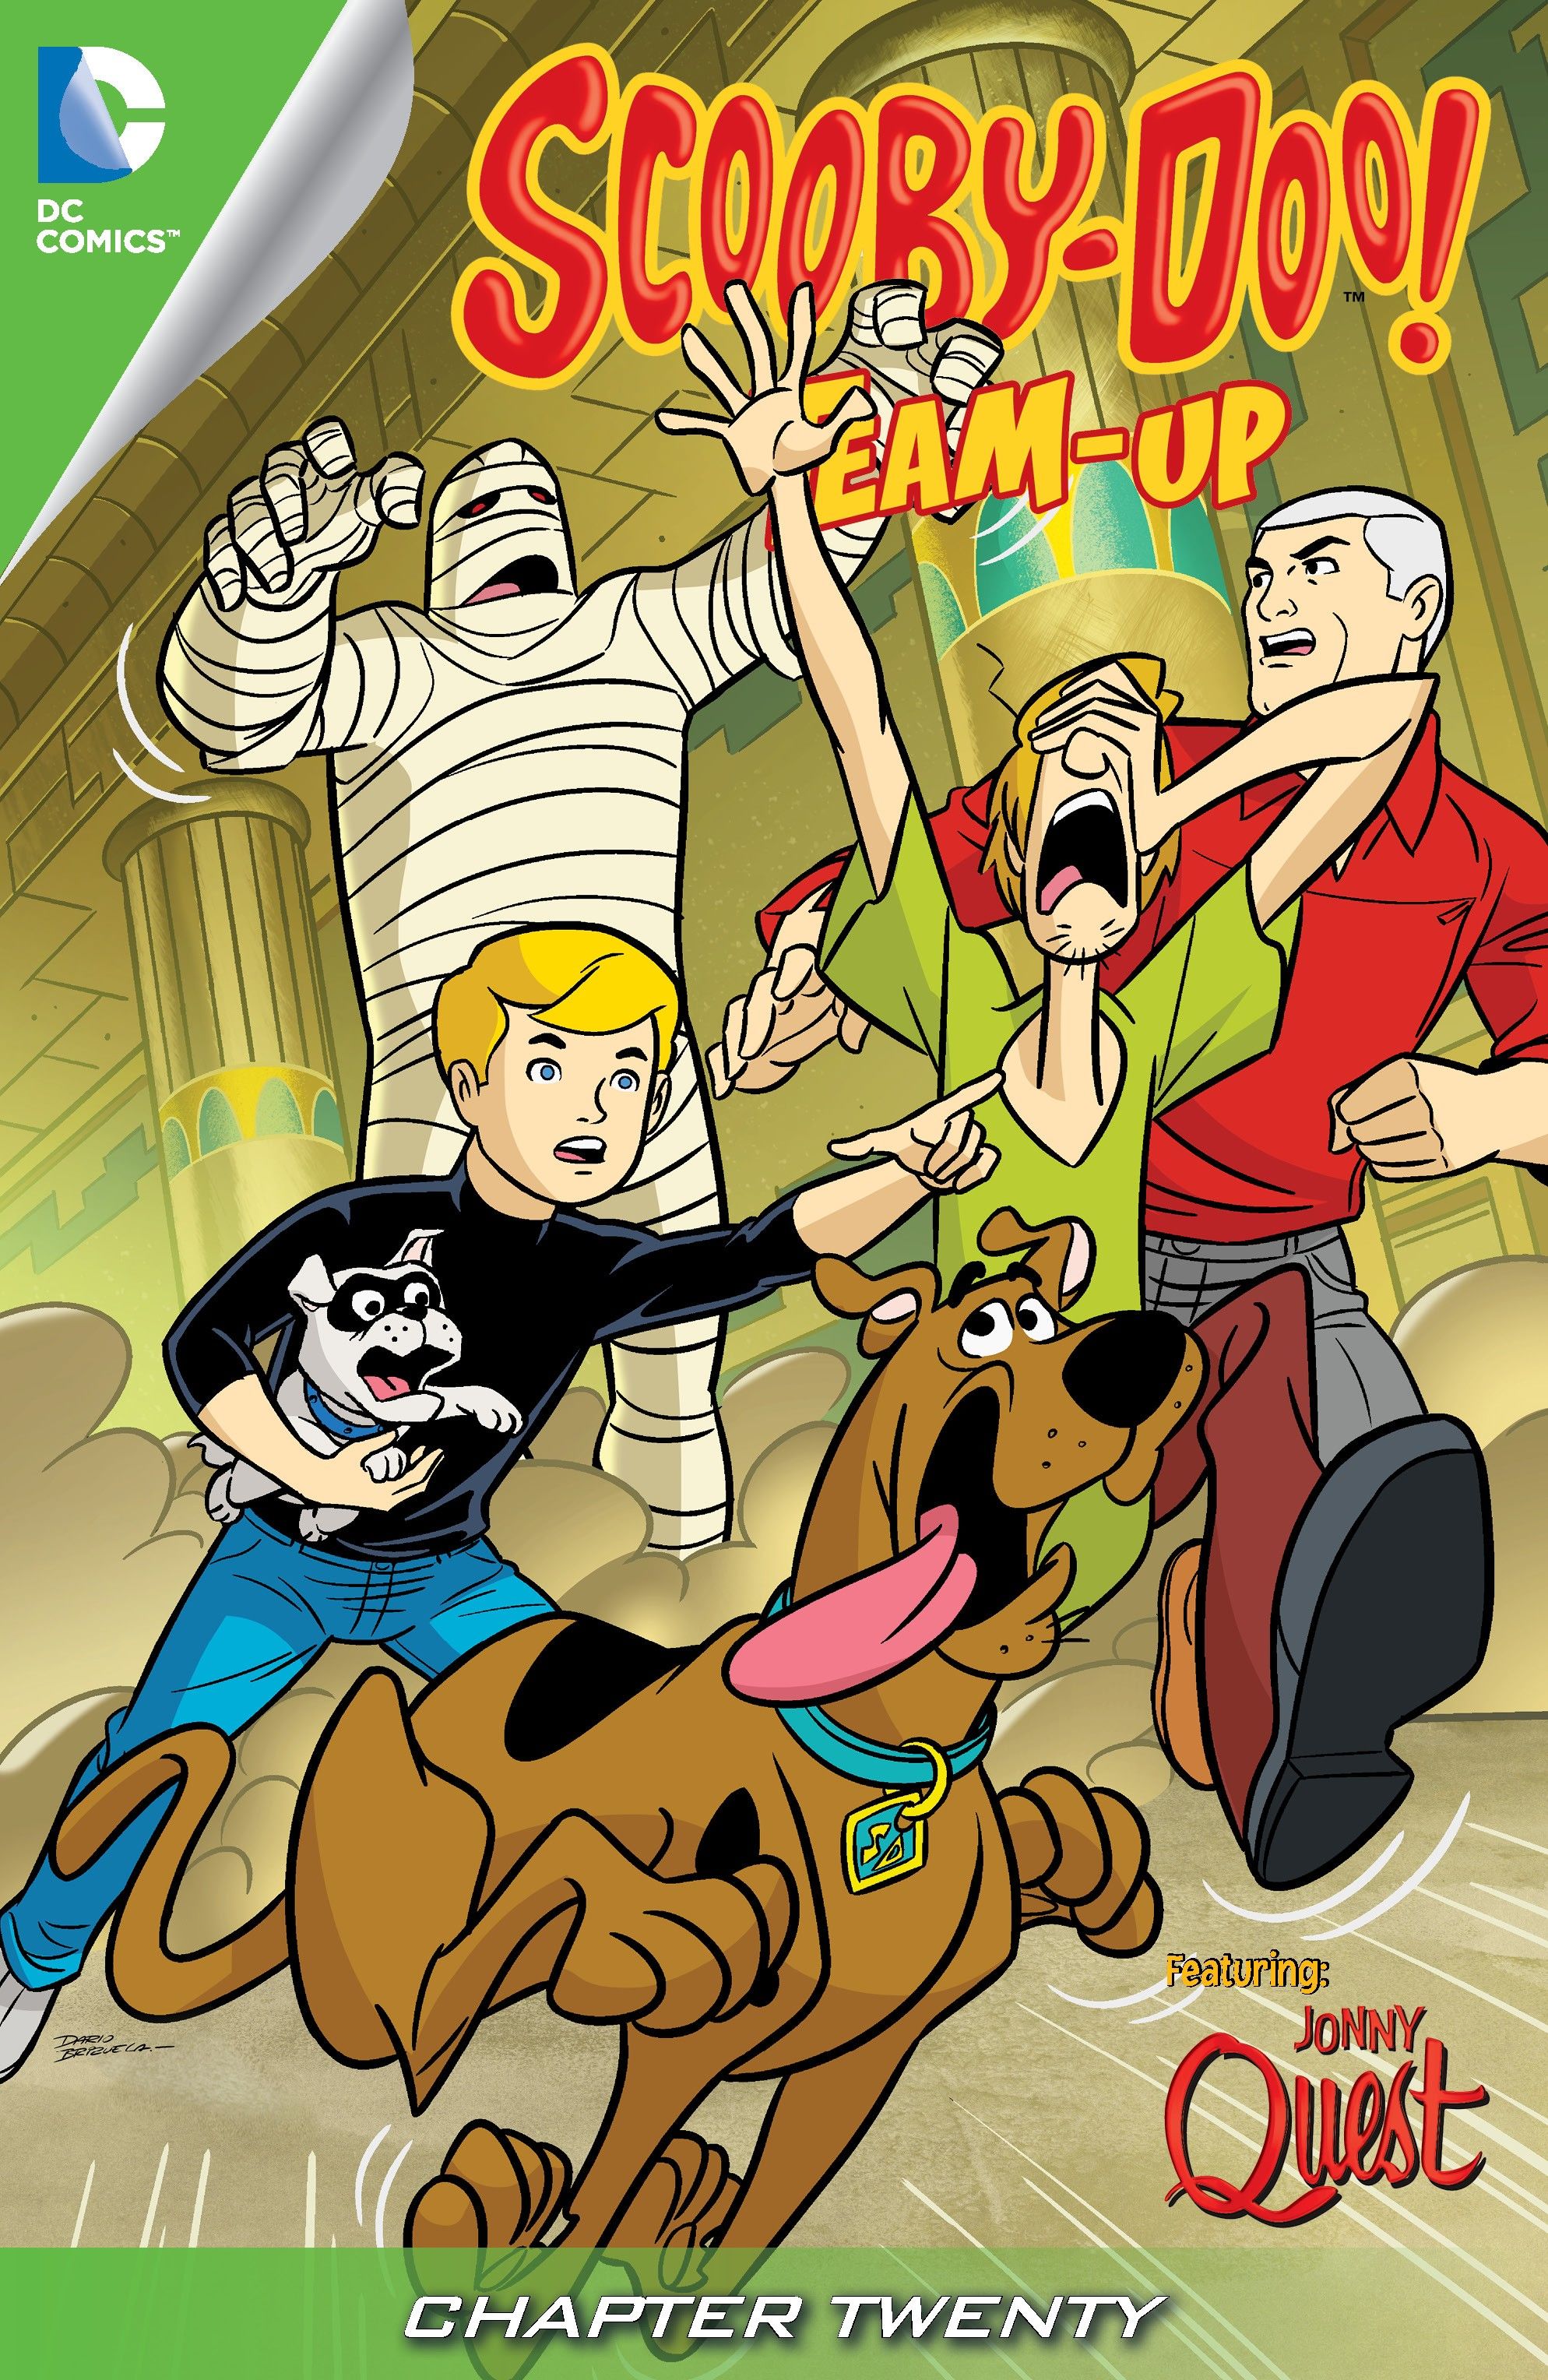 Read online Scooby-Doo! Team-Up comic -  Issue #20 - 2